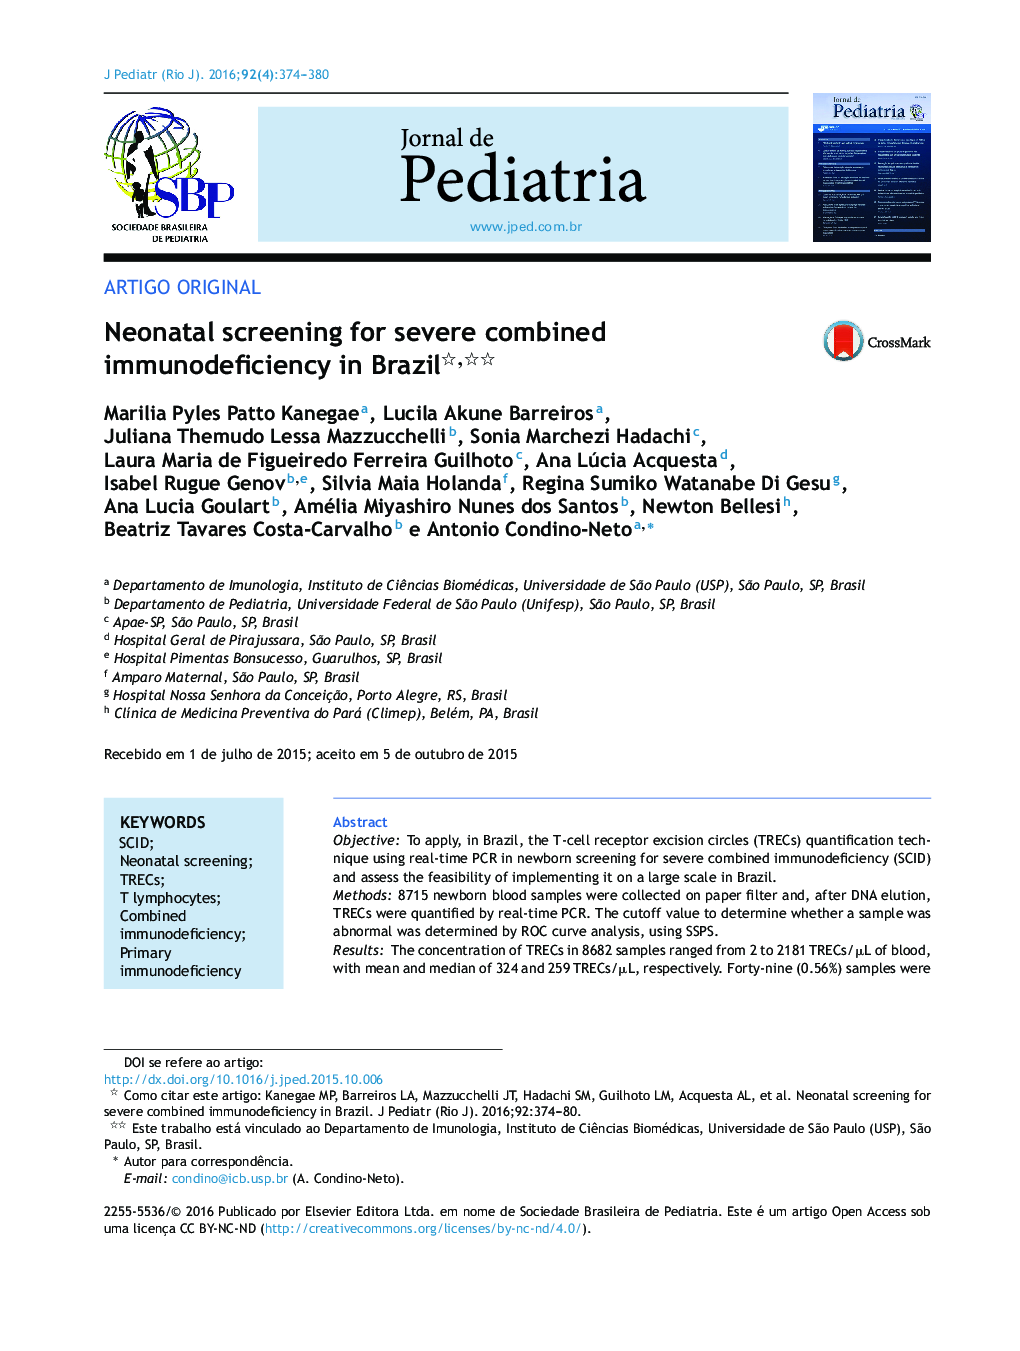 Neonatal screening for severe combined immunodeficiency in Brazil 